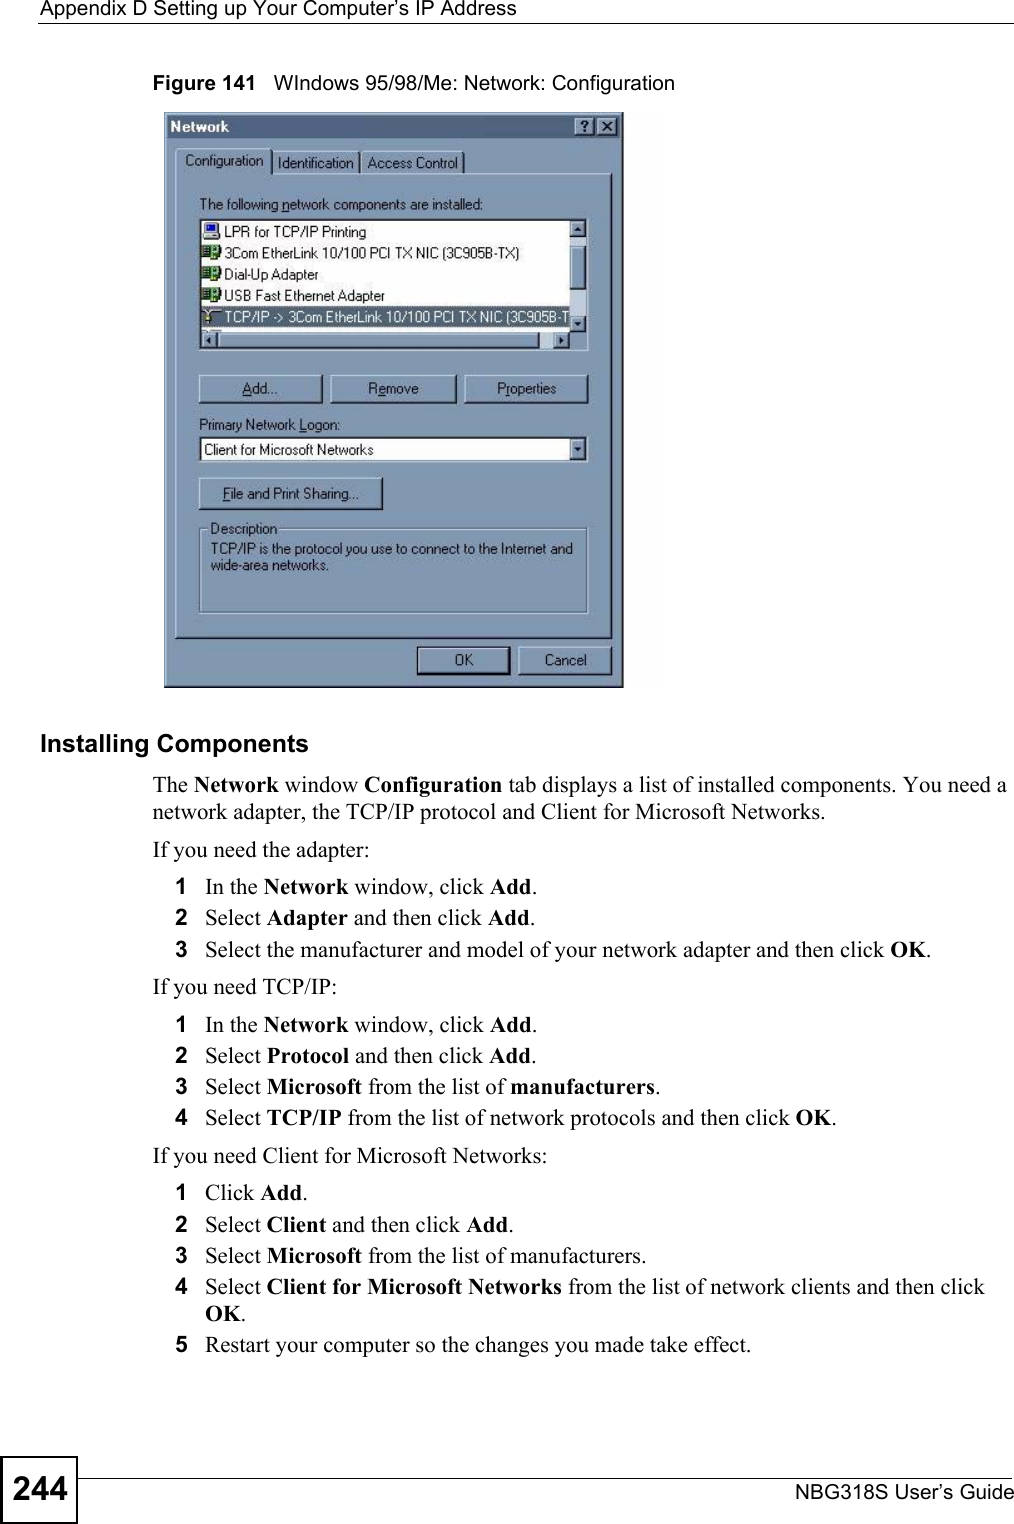 Appendix D Setting up Your Computer’s IP AddressNBG318S User’s Guide244Figure 141   WIndows 95/98/Me: Network: ConfigurationInstalling ComponentsThe Network window Configuration tab displays a list of installed components. You need a network adapter, the TCP/IP protocol and Client for Microsoft Networks.If you need the adapter:1In the Network window, click Add.2Select Adapter and then click Add.3Select the manufacturer and model of your network adapter and then click OK.If you need TCP/IP:1In the Network window, click Add.2Select Protocol and then click Add.3Select Microsoft from the list of manufacturers.4Select TCP/IP from the list of network protocols and then click OK.If you need Client for Microsoft Networks:1Click Add.2Select Client and then click Add.3Select Microsoft from the list of manufacturers.4Select Client for Microsoft Networks from the list of network clients and then click OK.5Restart your computer so the changes you made take effect.